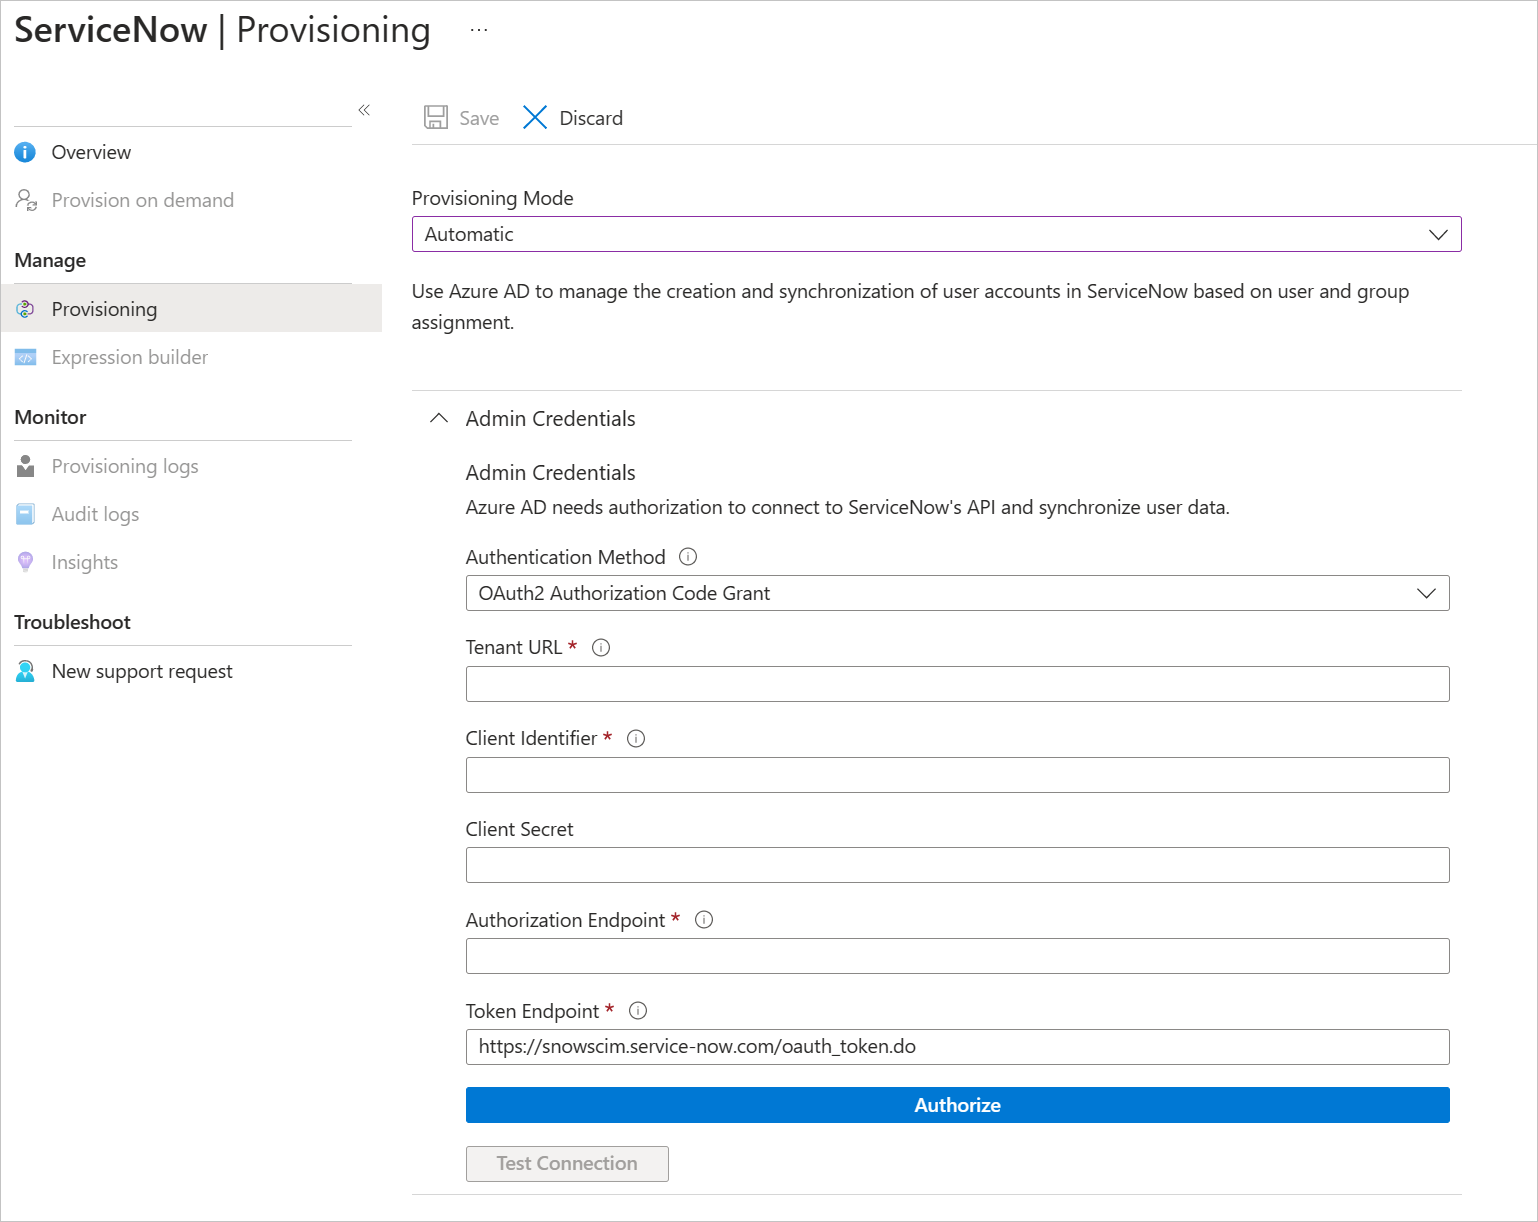 Screenshot that shows the Service Provisioning page, where you can enter admin credentials.